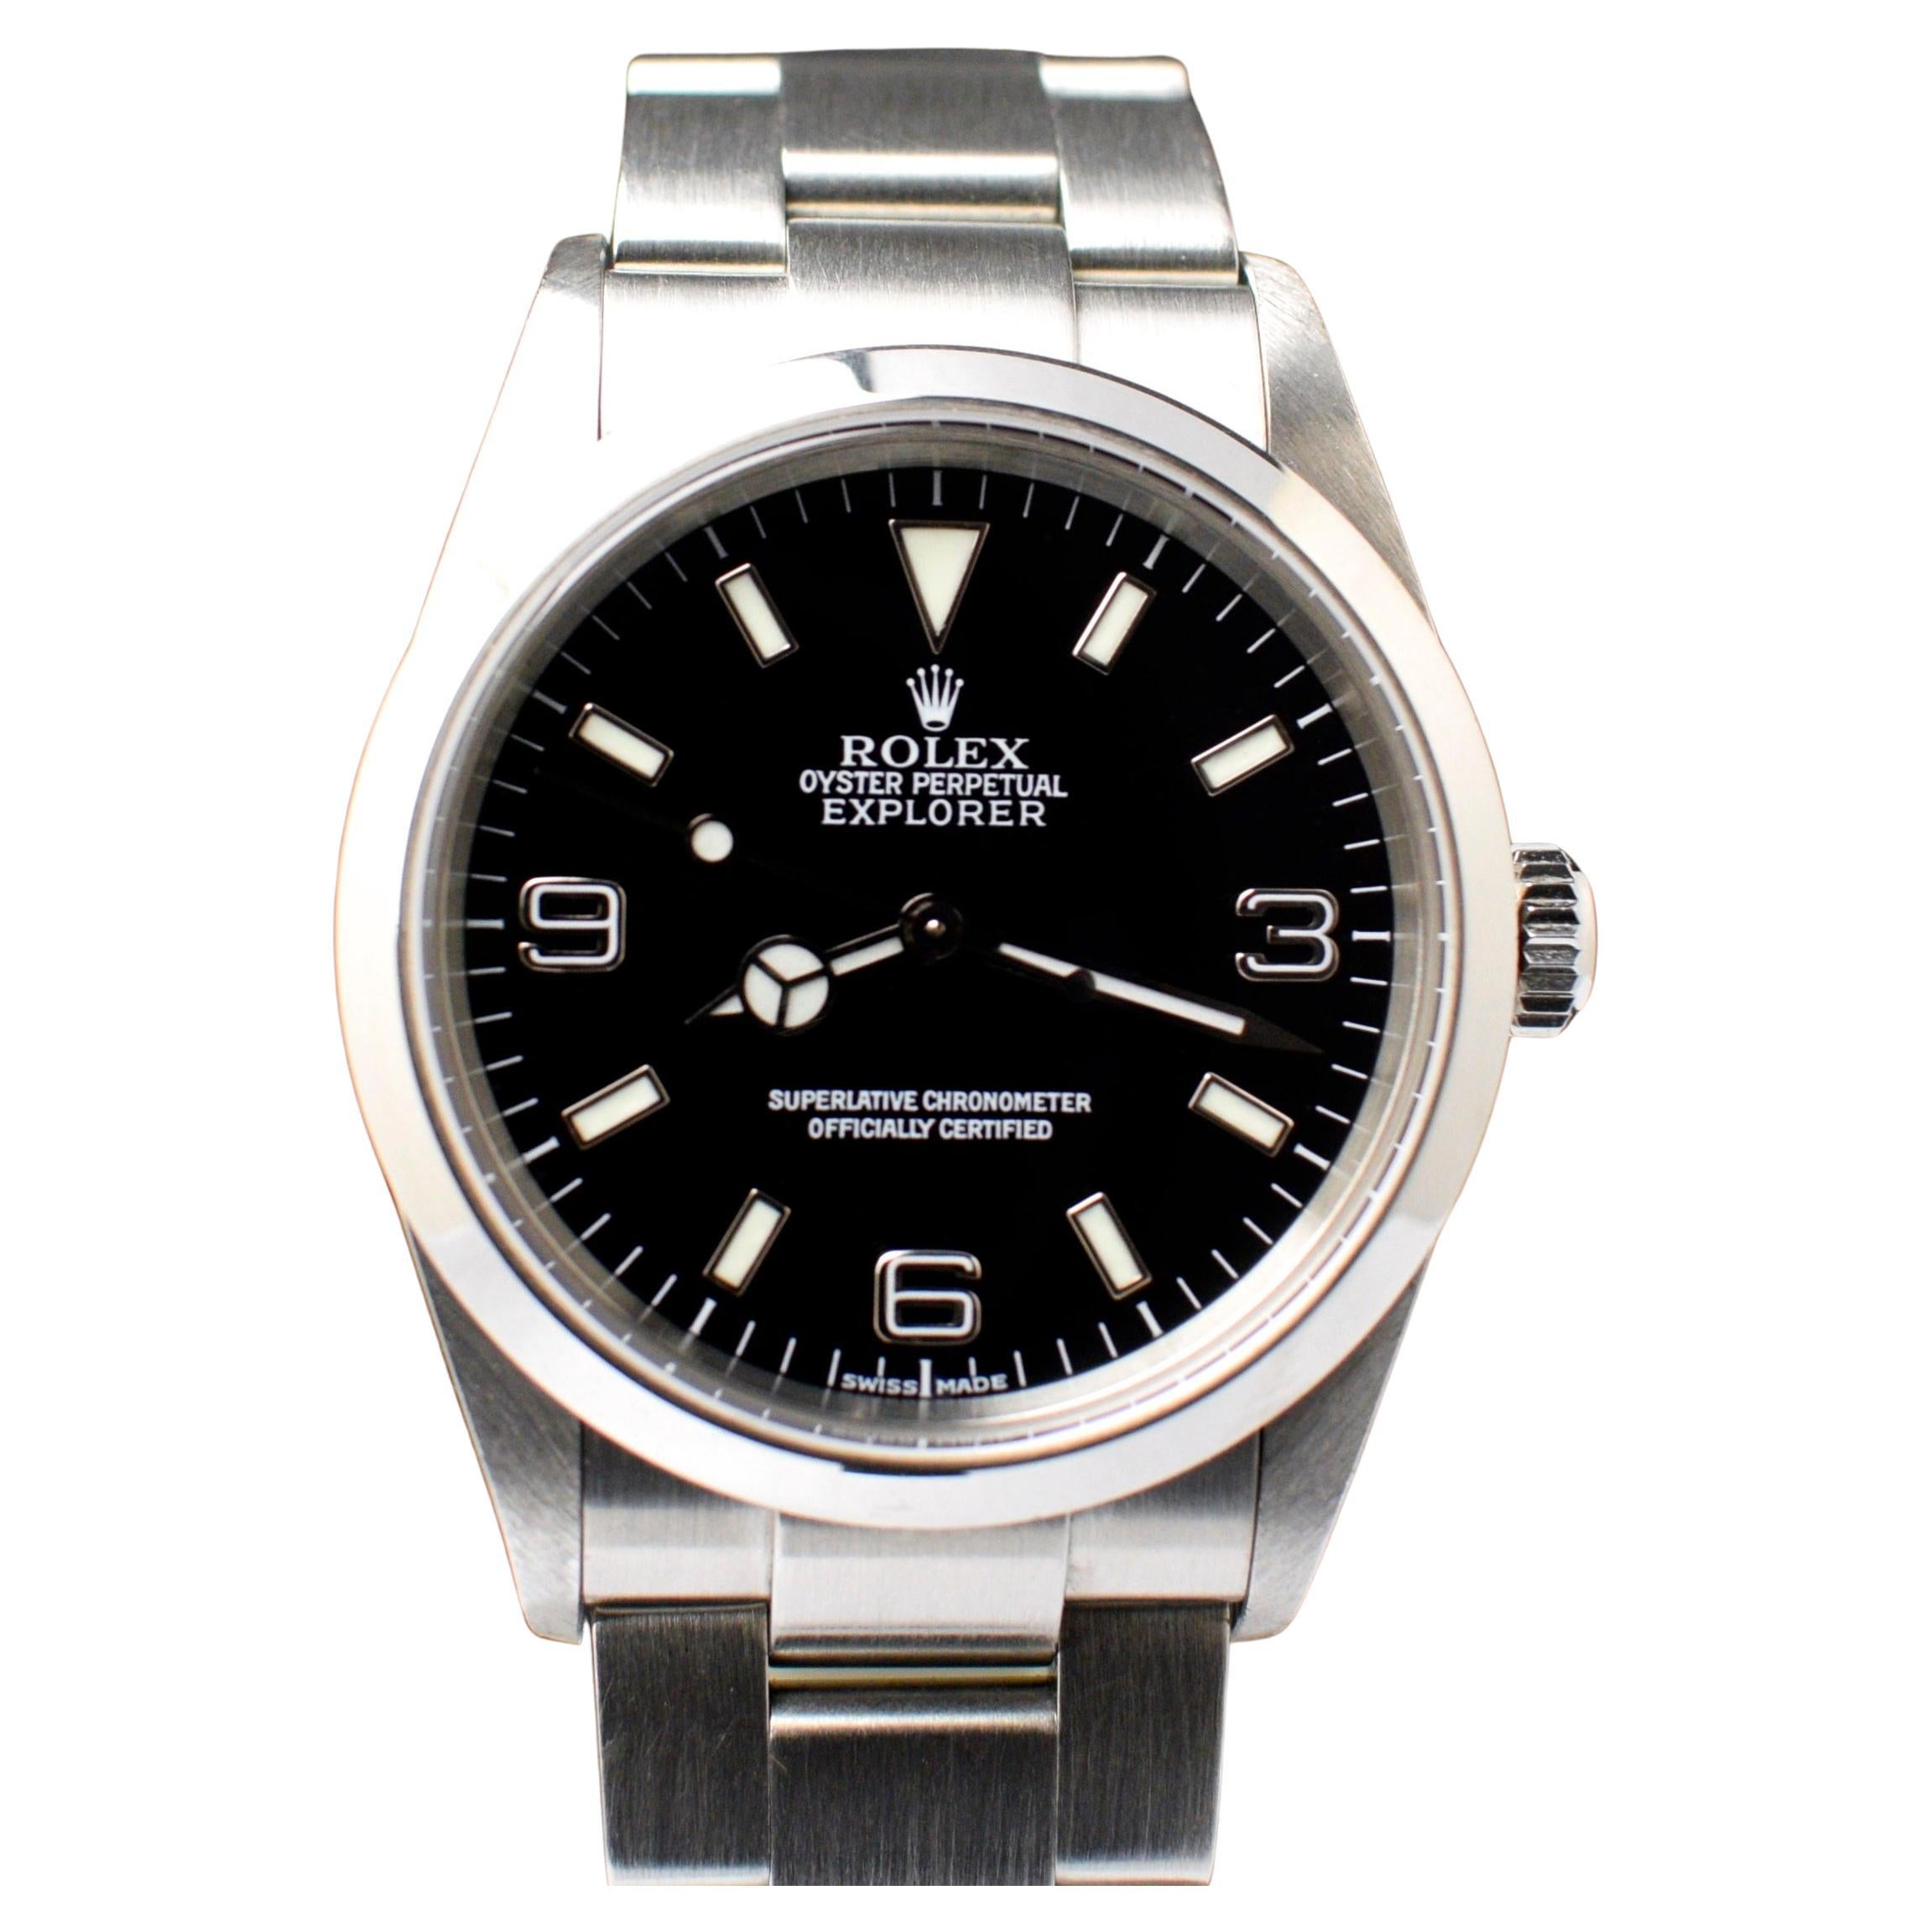 How do I change the date on a Rolex watch?